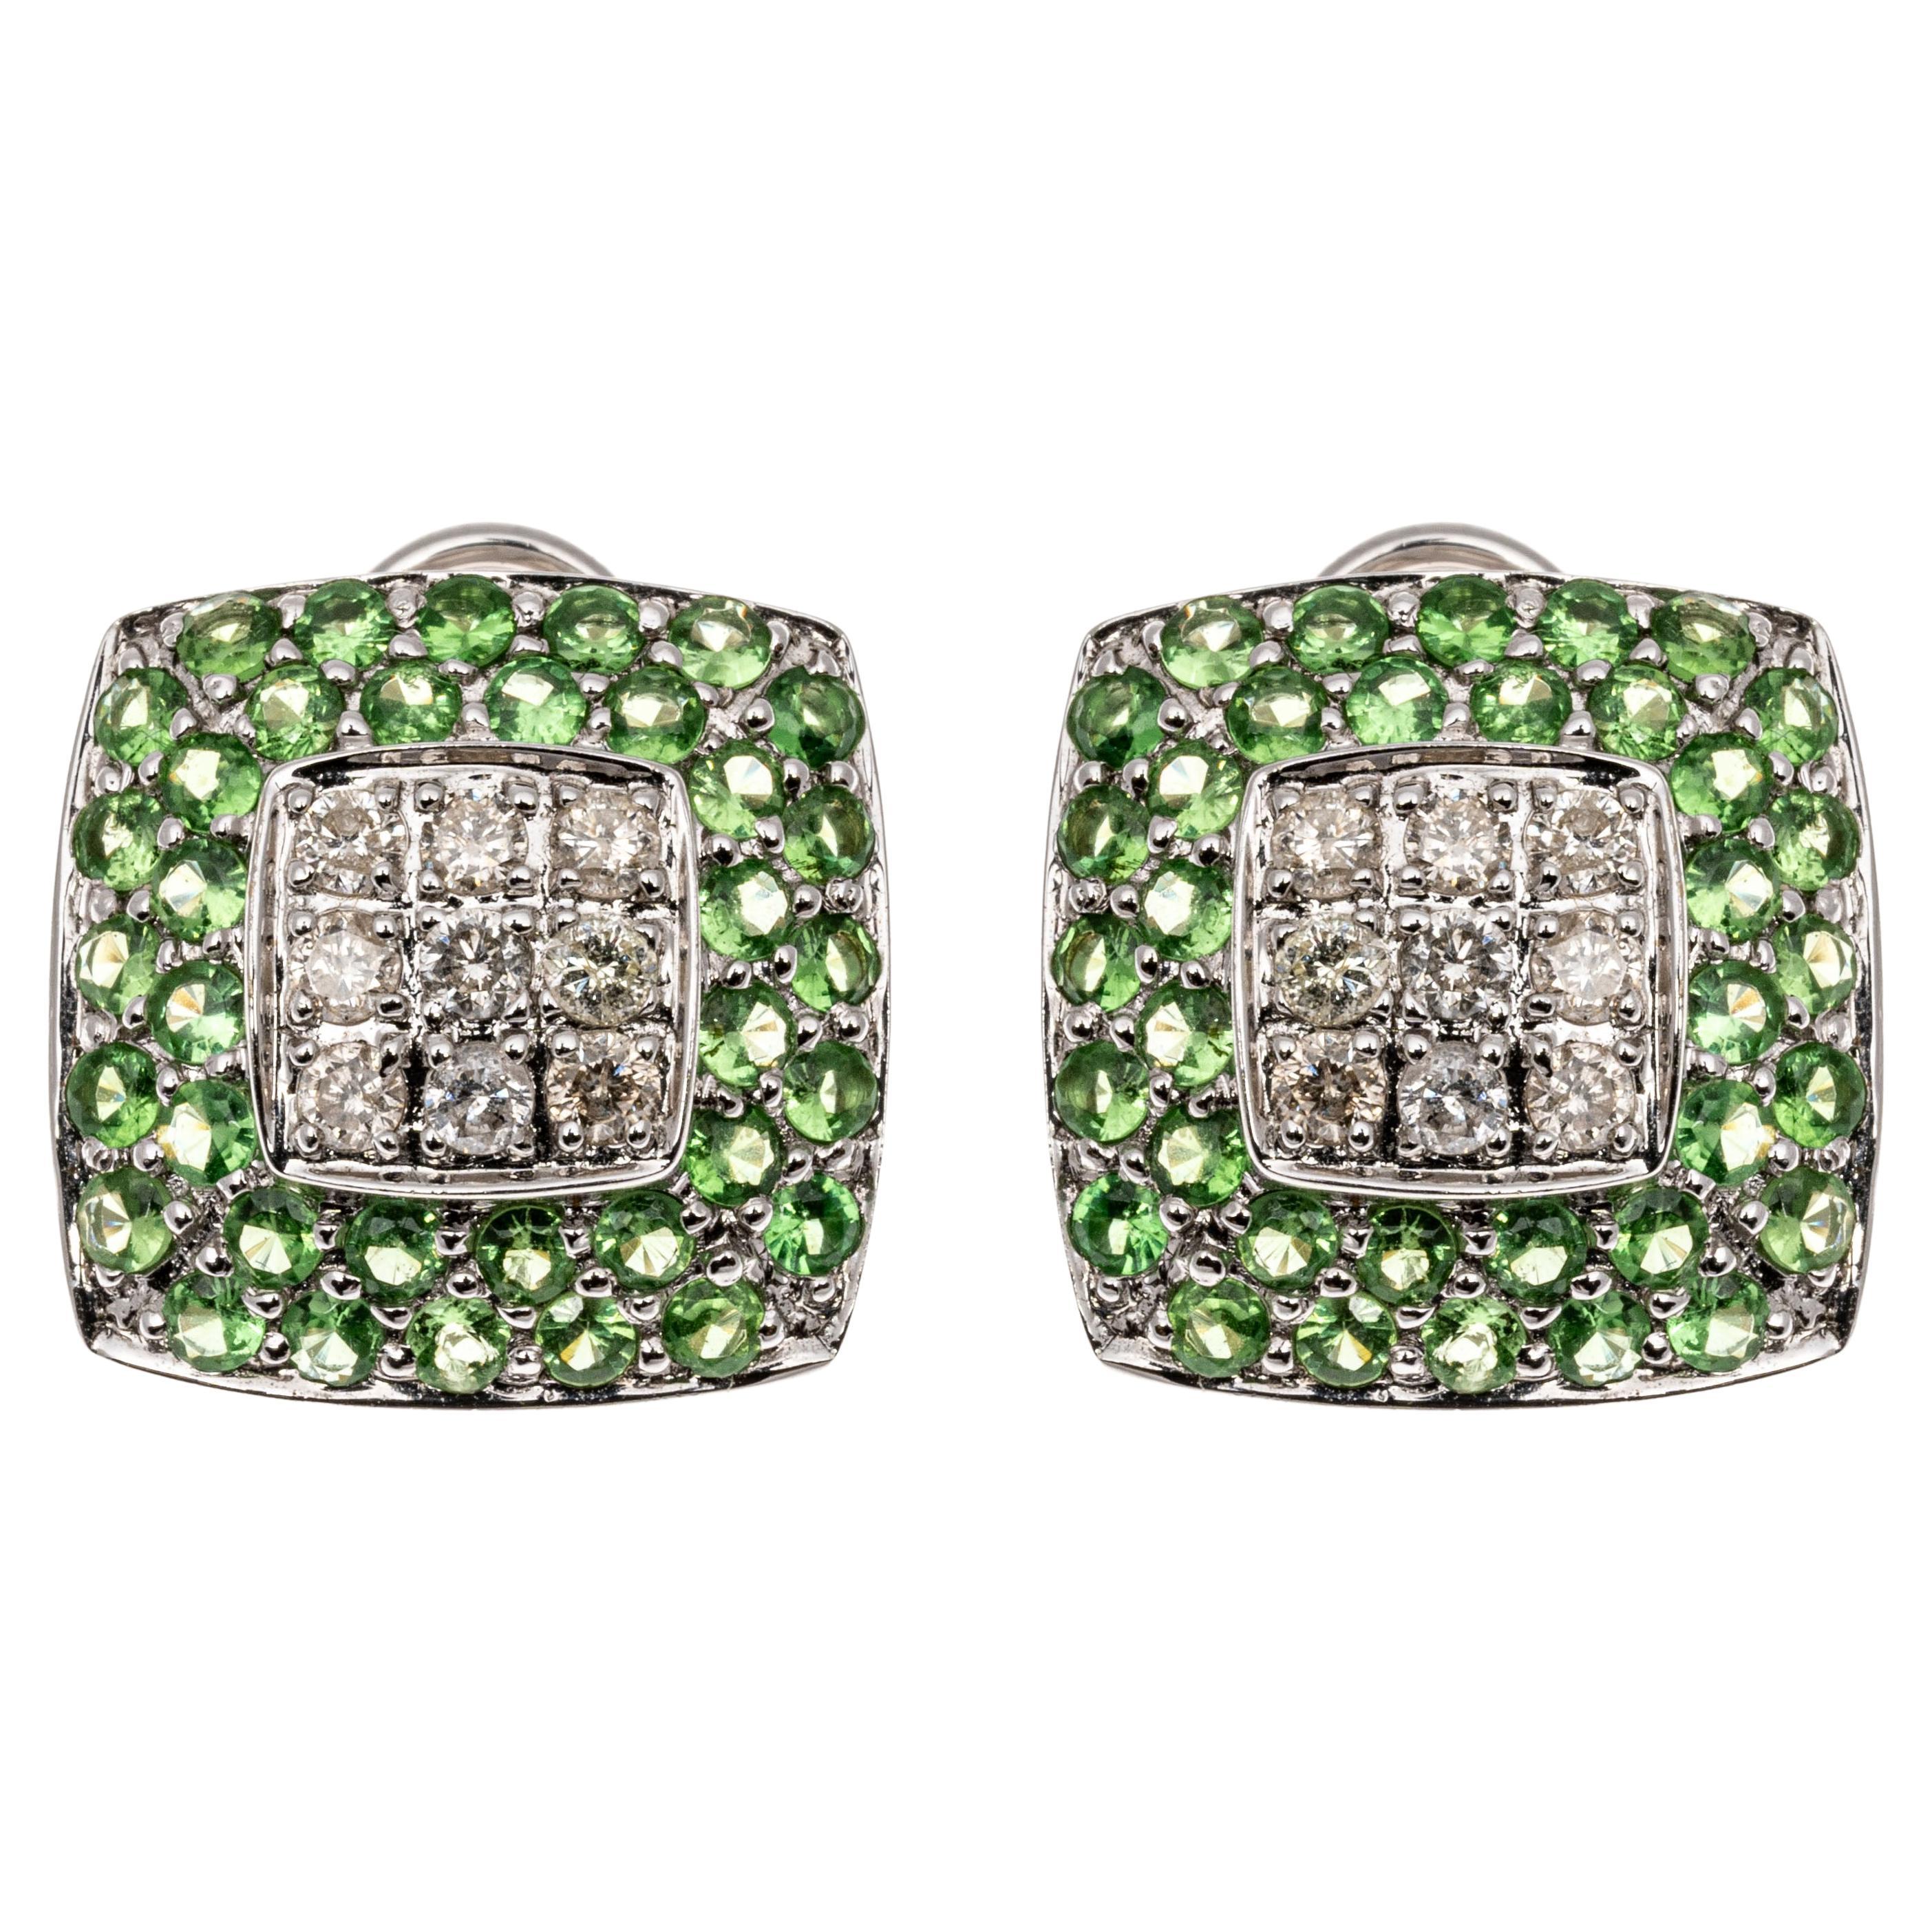 18k White Gold Magnificent Tsavorite and Diamond Pave Set Cushion Earrings